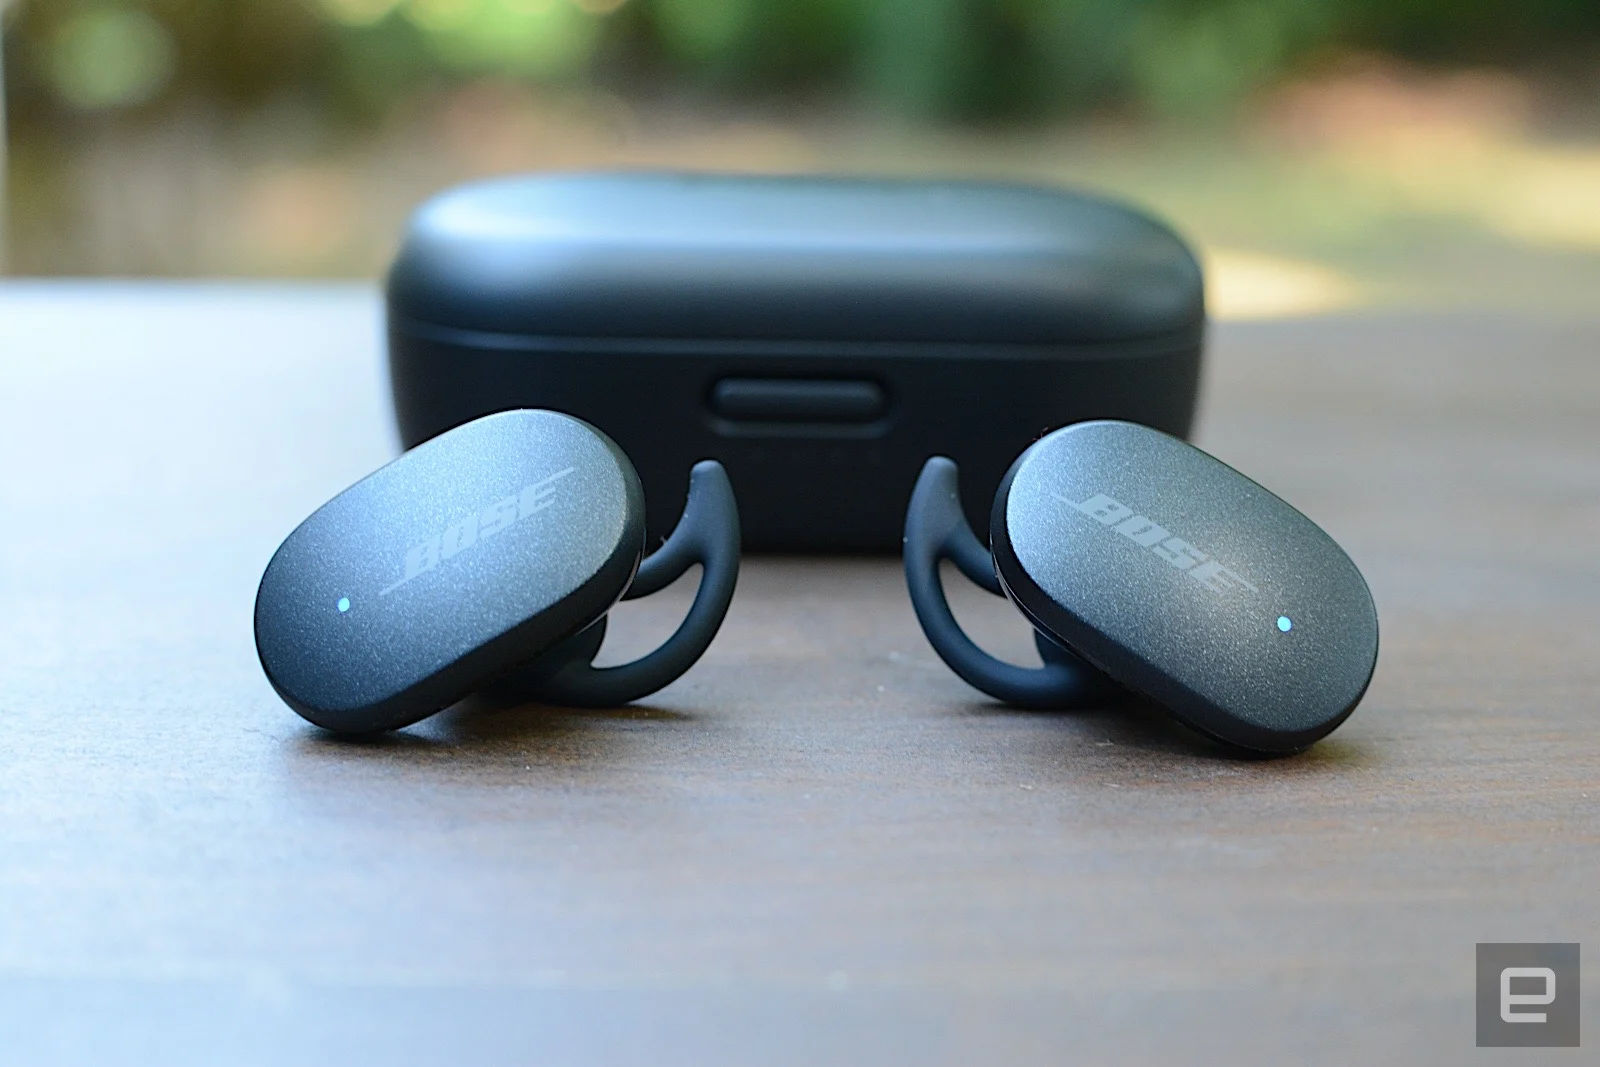 Bose doesn’t have the true wireless experience of some other headphone companies, but you would never know it. The QC Earbuds are a huge leap over the SoundSport Free model from 2017. The company provides the best ANC performance you’ll find in true wireless buds on top of great sound quality. There are some missing features, but the basics are covered, and there’s wireless charging as well.  